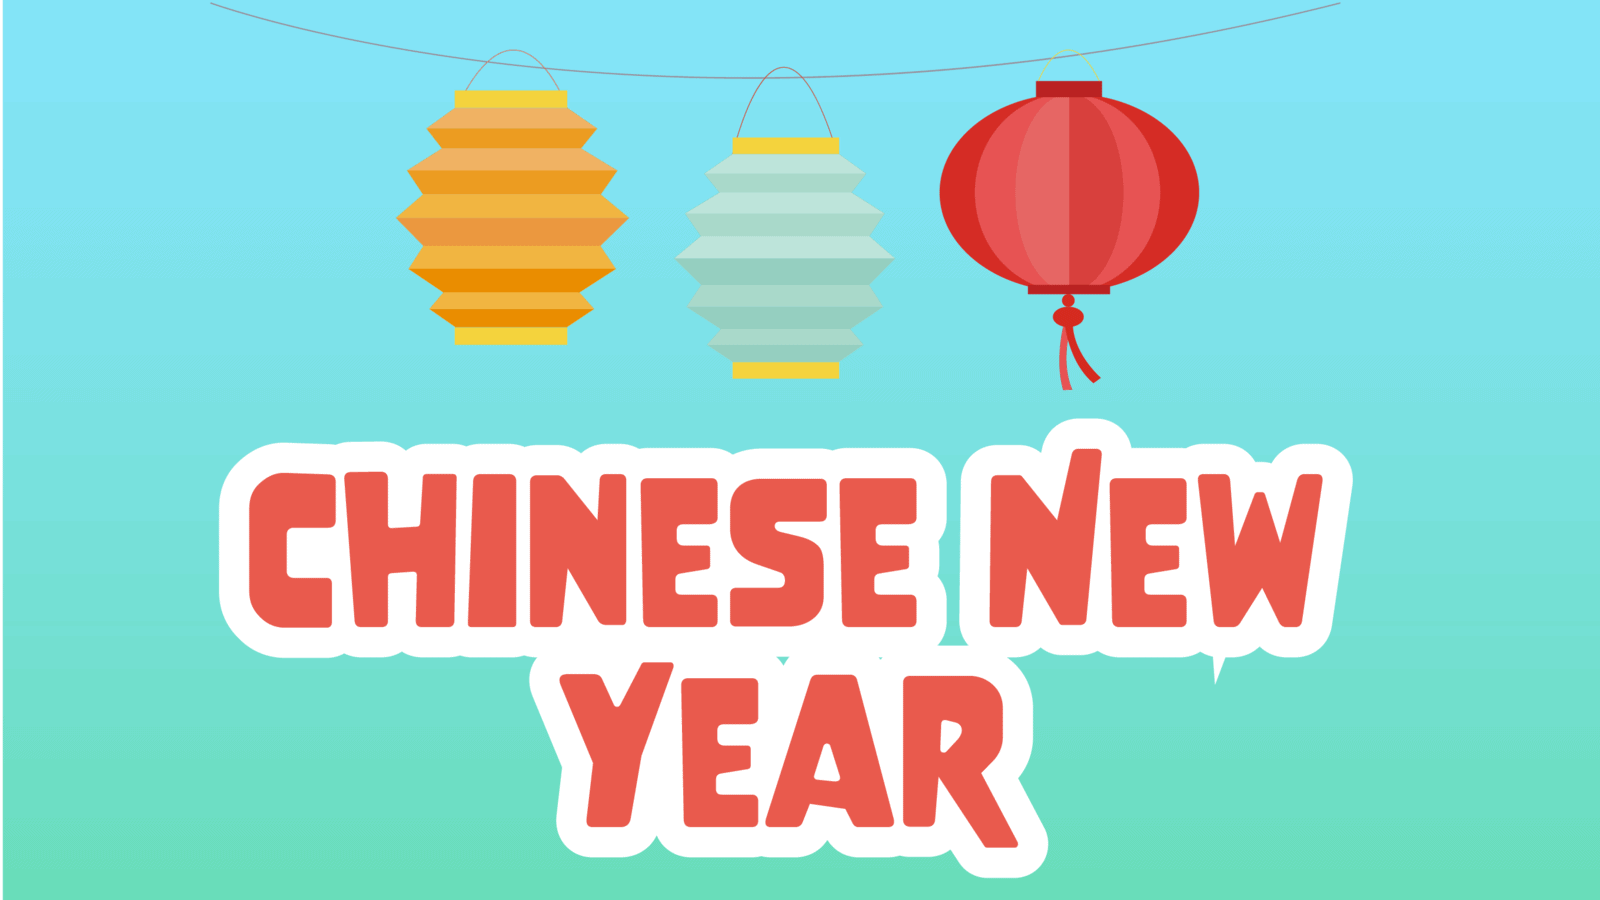 Chinese New Year Facts for Kids – 5 Charming Facts about Chinese New Year